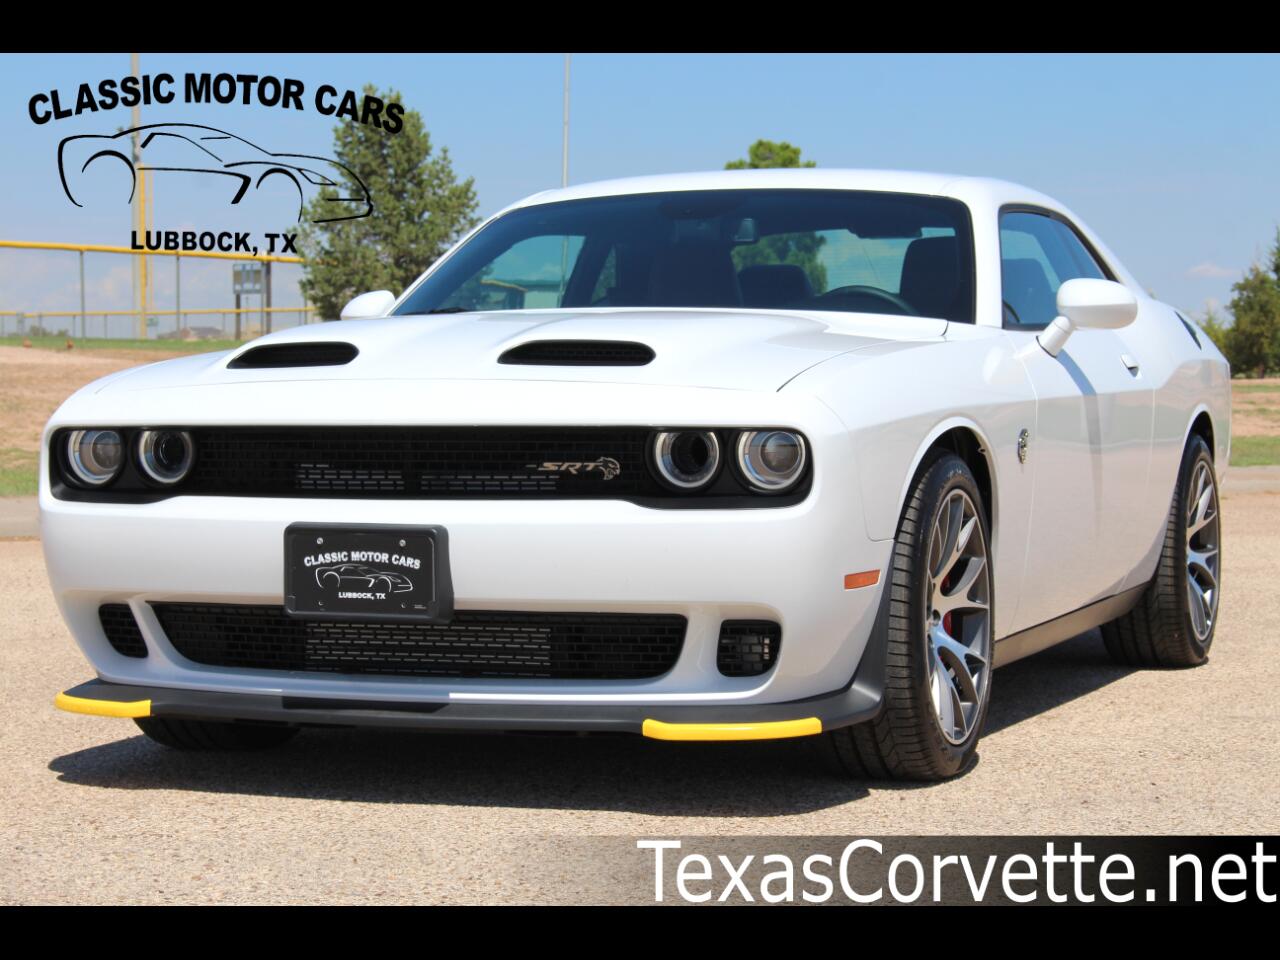 Quality Used Classic Cars in Lubbock, TX at Classic Motor Cars